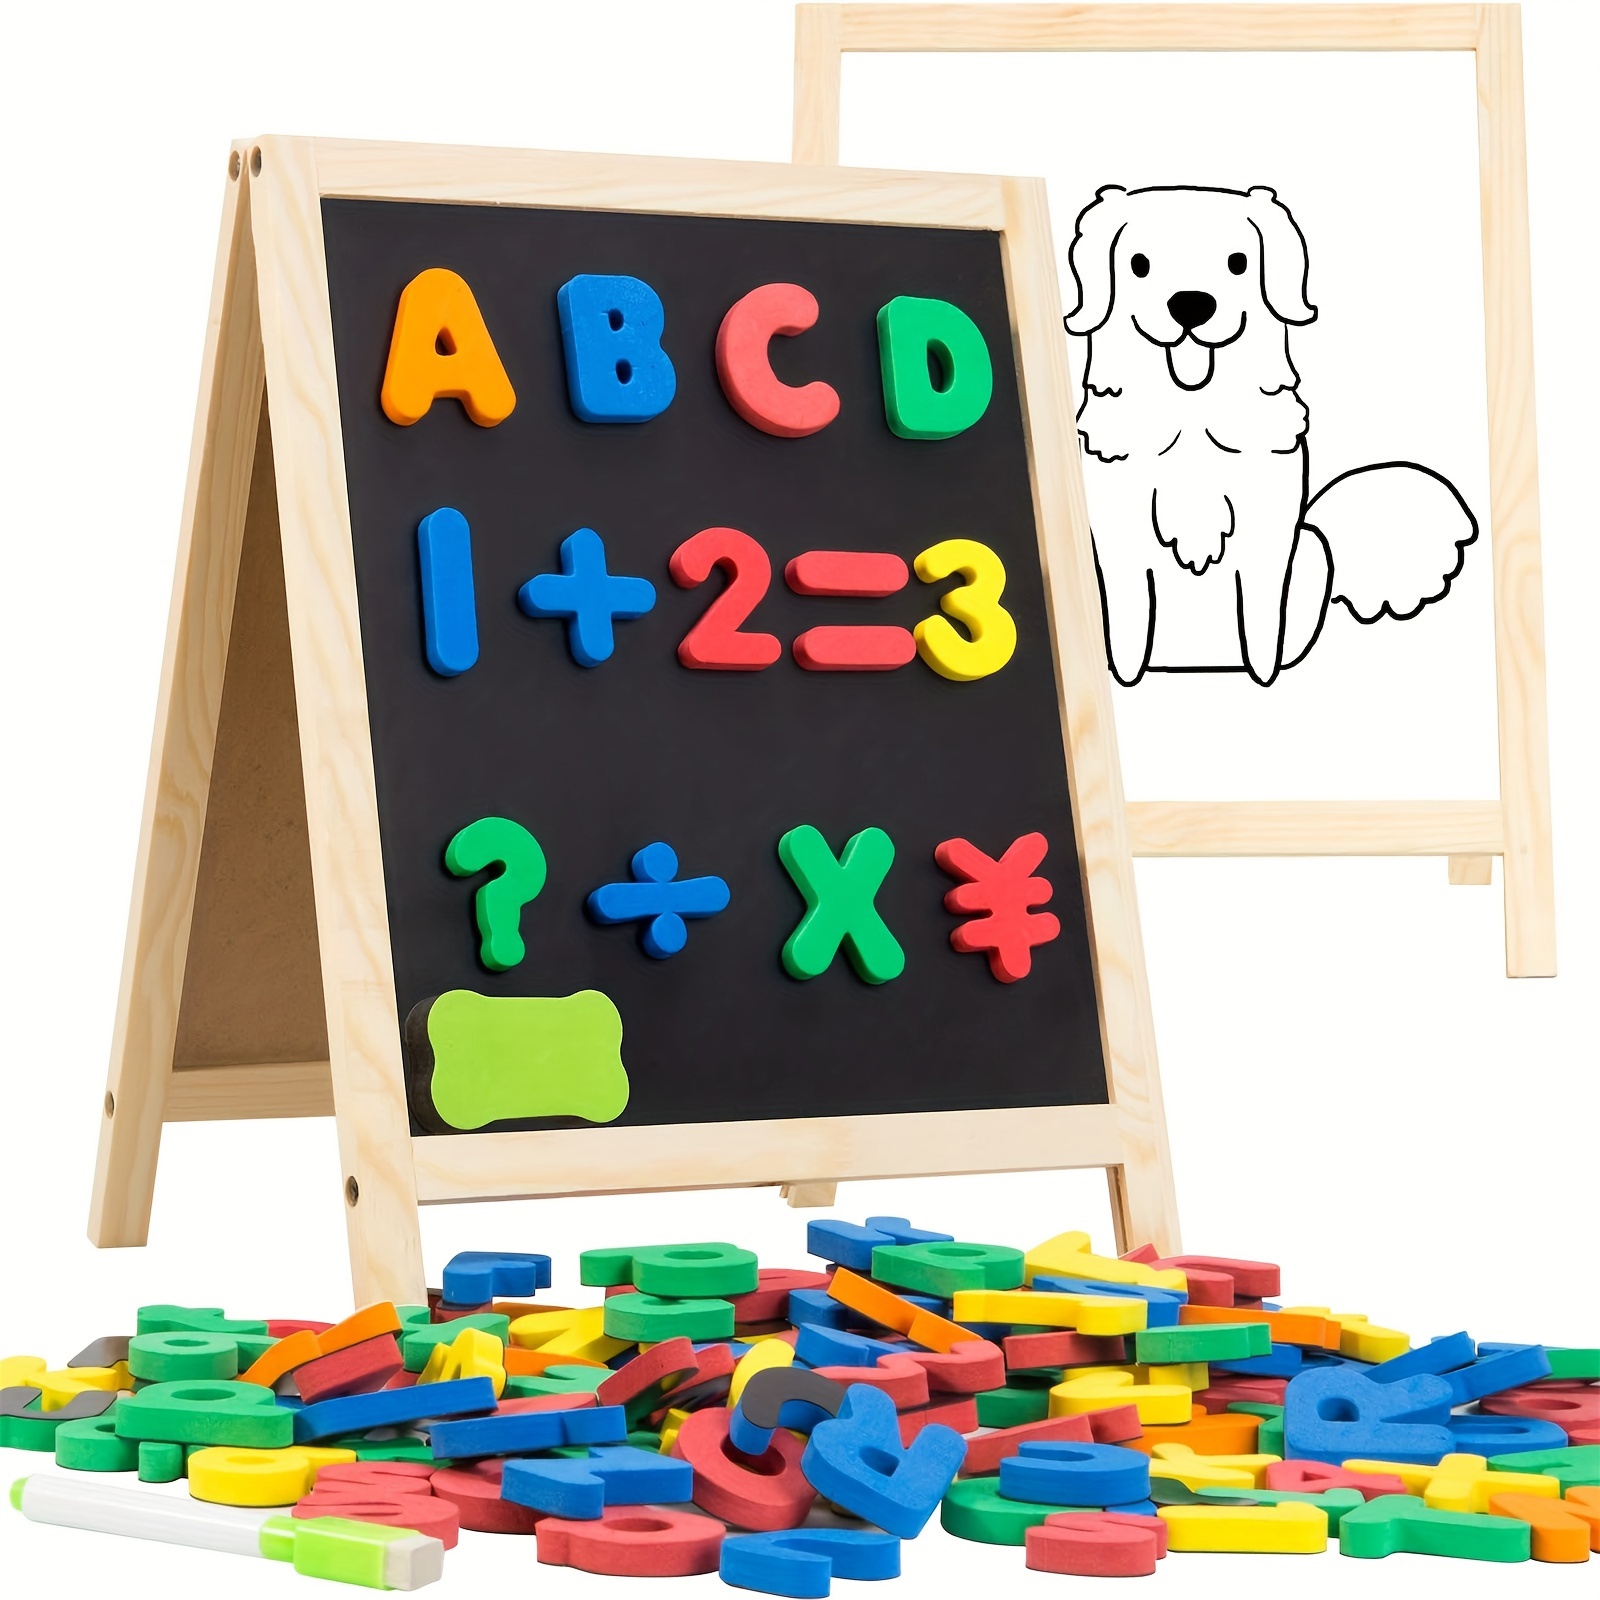 

Magnetic Letters And Numbers For Toddlers, Magnetic Board For Kids, Abc Alphabet Magnets, Educational Dry Erase Board - Whiteboard & Chalkboard For Toddlers 1-3 For Writing & Drawing